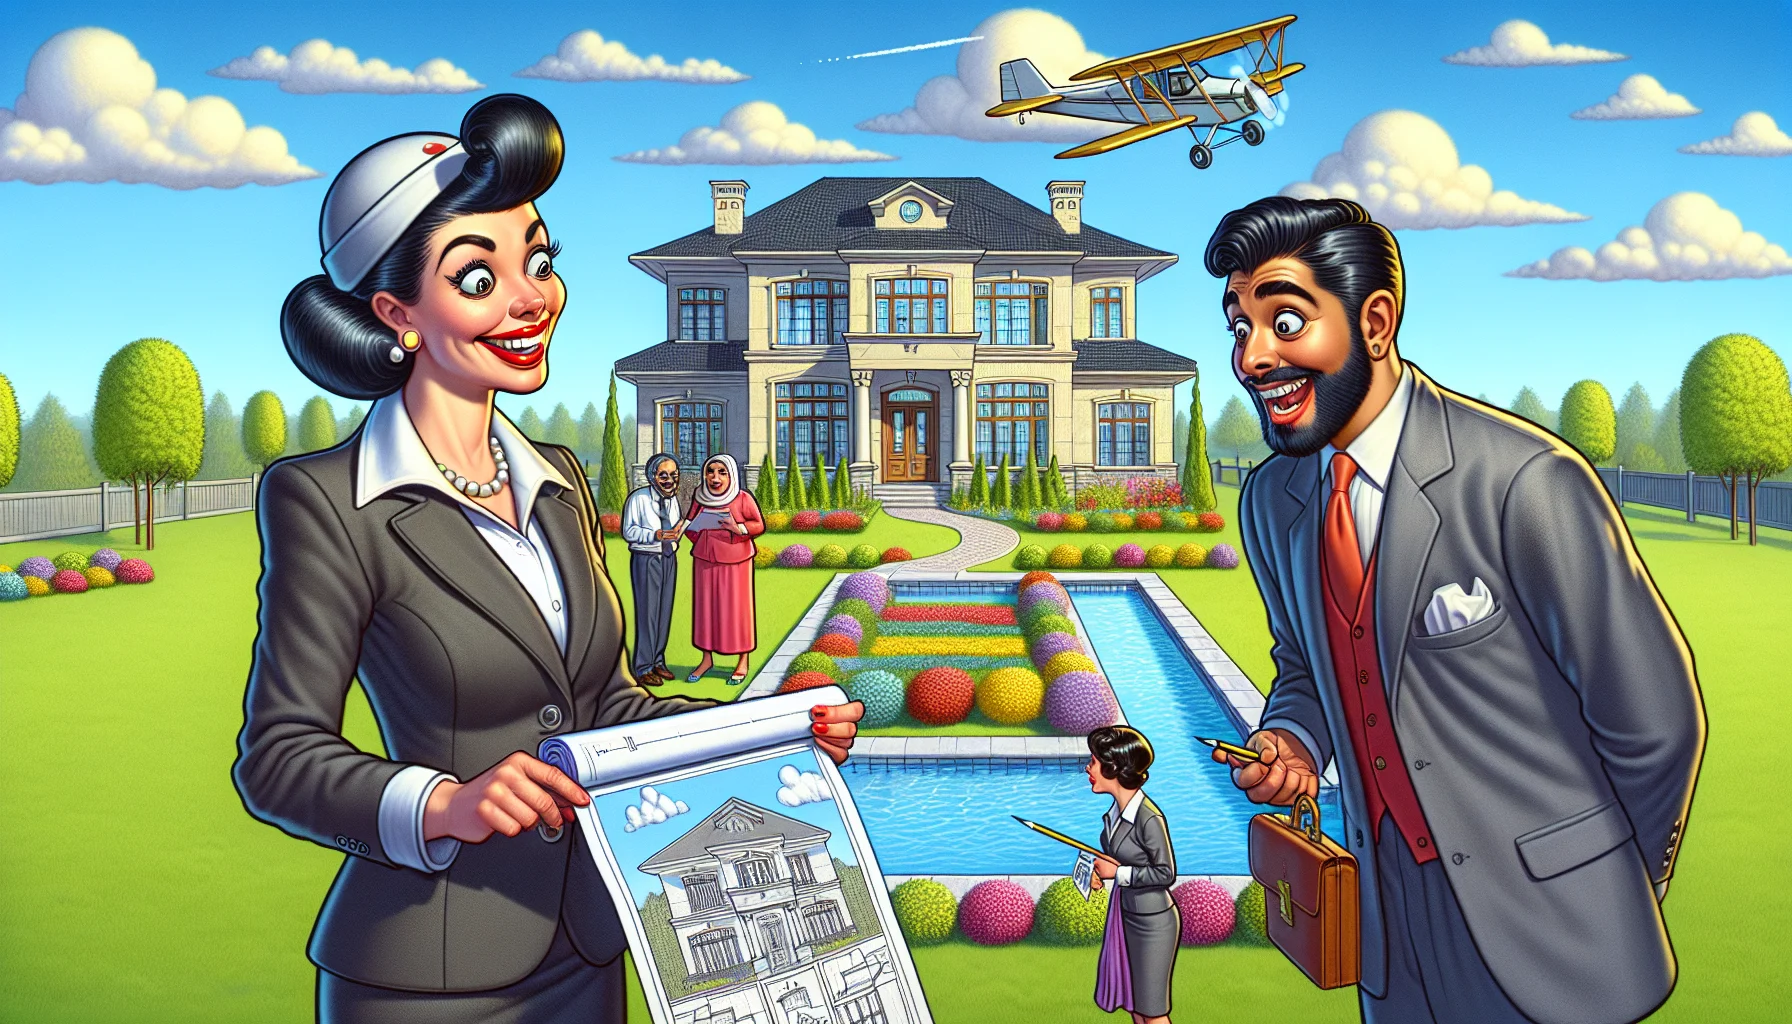 Draw a humorous, yet realistic scene of an ideal real estate scenario. Picture a real estate agent in a suit, a Hispanic woman, holding a blueprint of a magnificent mansion on a bright, sunny day. Around her, prospective buyers, a Middle-Eastern man and a Caucasian woman, are delightfully astonished by the marvelous property, including a perfect, emerald green lawn, colourful flower beds, and a sparkling, clean pool. In the sky above, a banner flown by a small pilot plane reads - 'Welcome To Your Dream Home'. Add slight caricature-like exaggerations to the facial expressions and gestures for the humorous aspect.